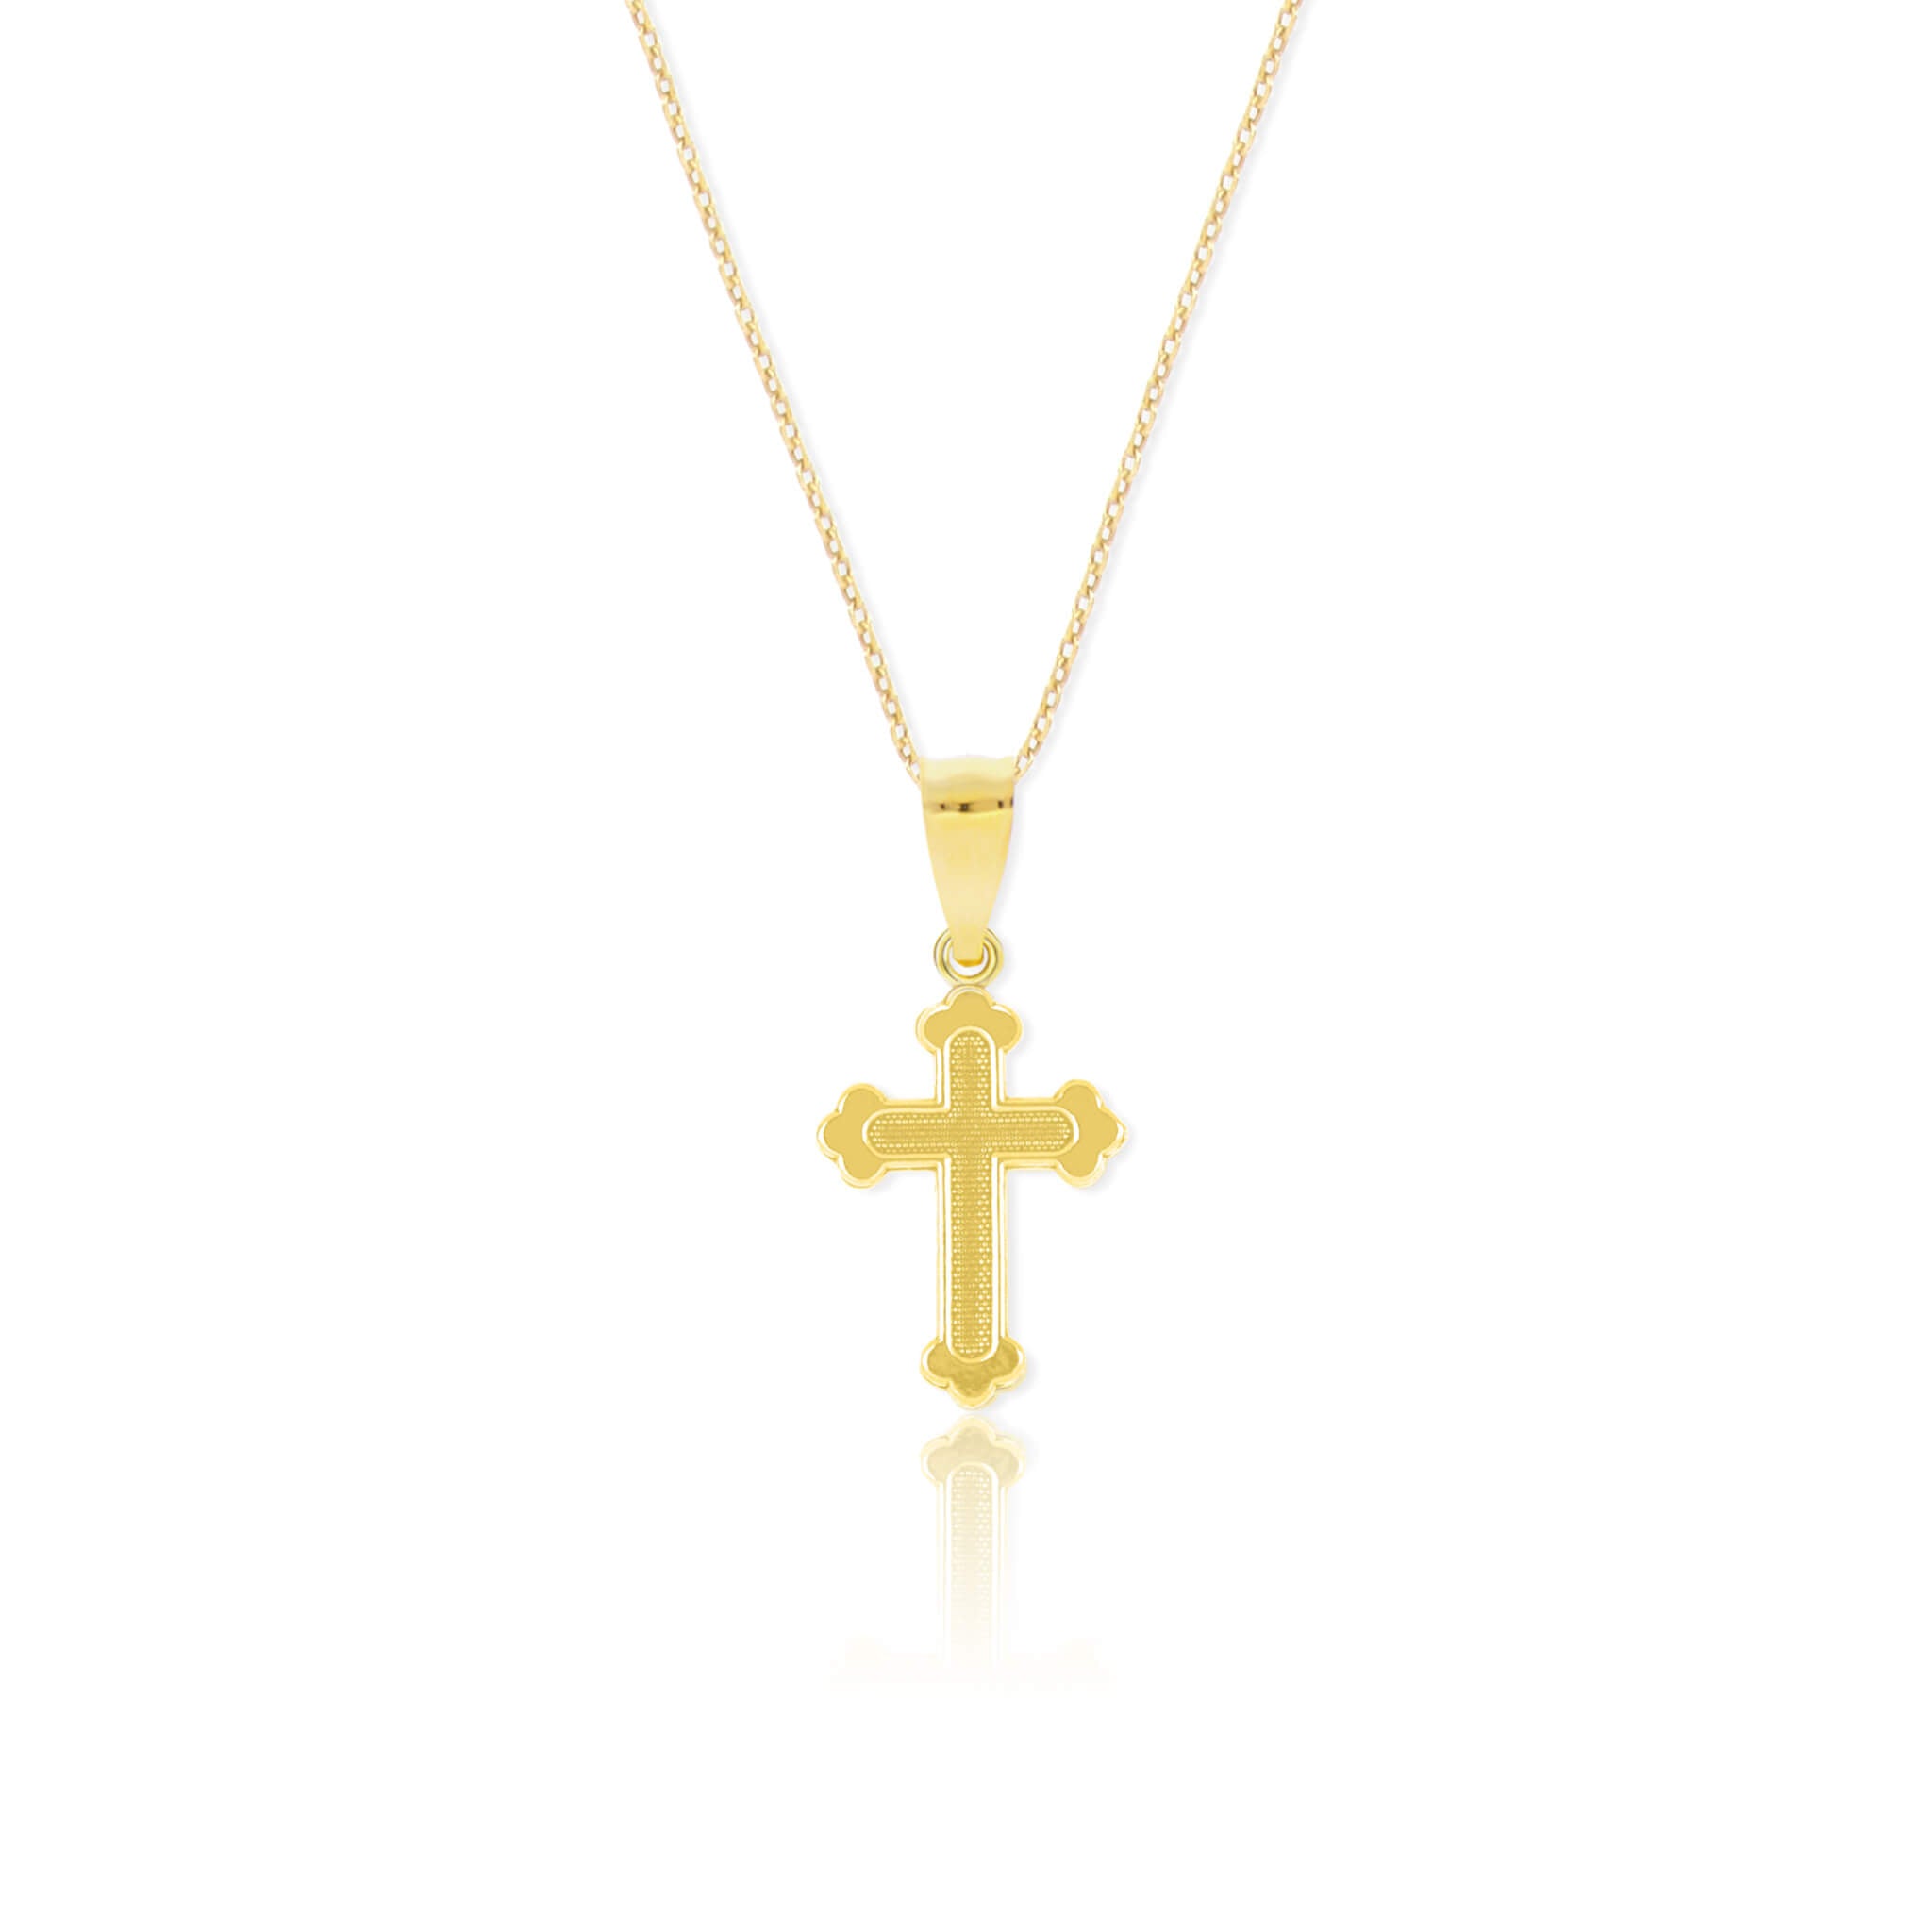 Three Pointed Style Cross Pendant Necklace - DressbarnNecklaces